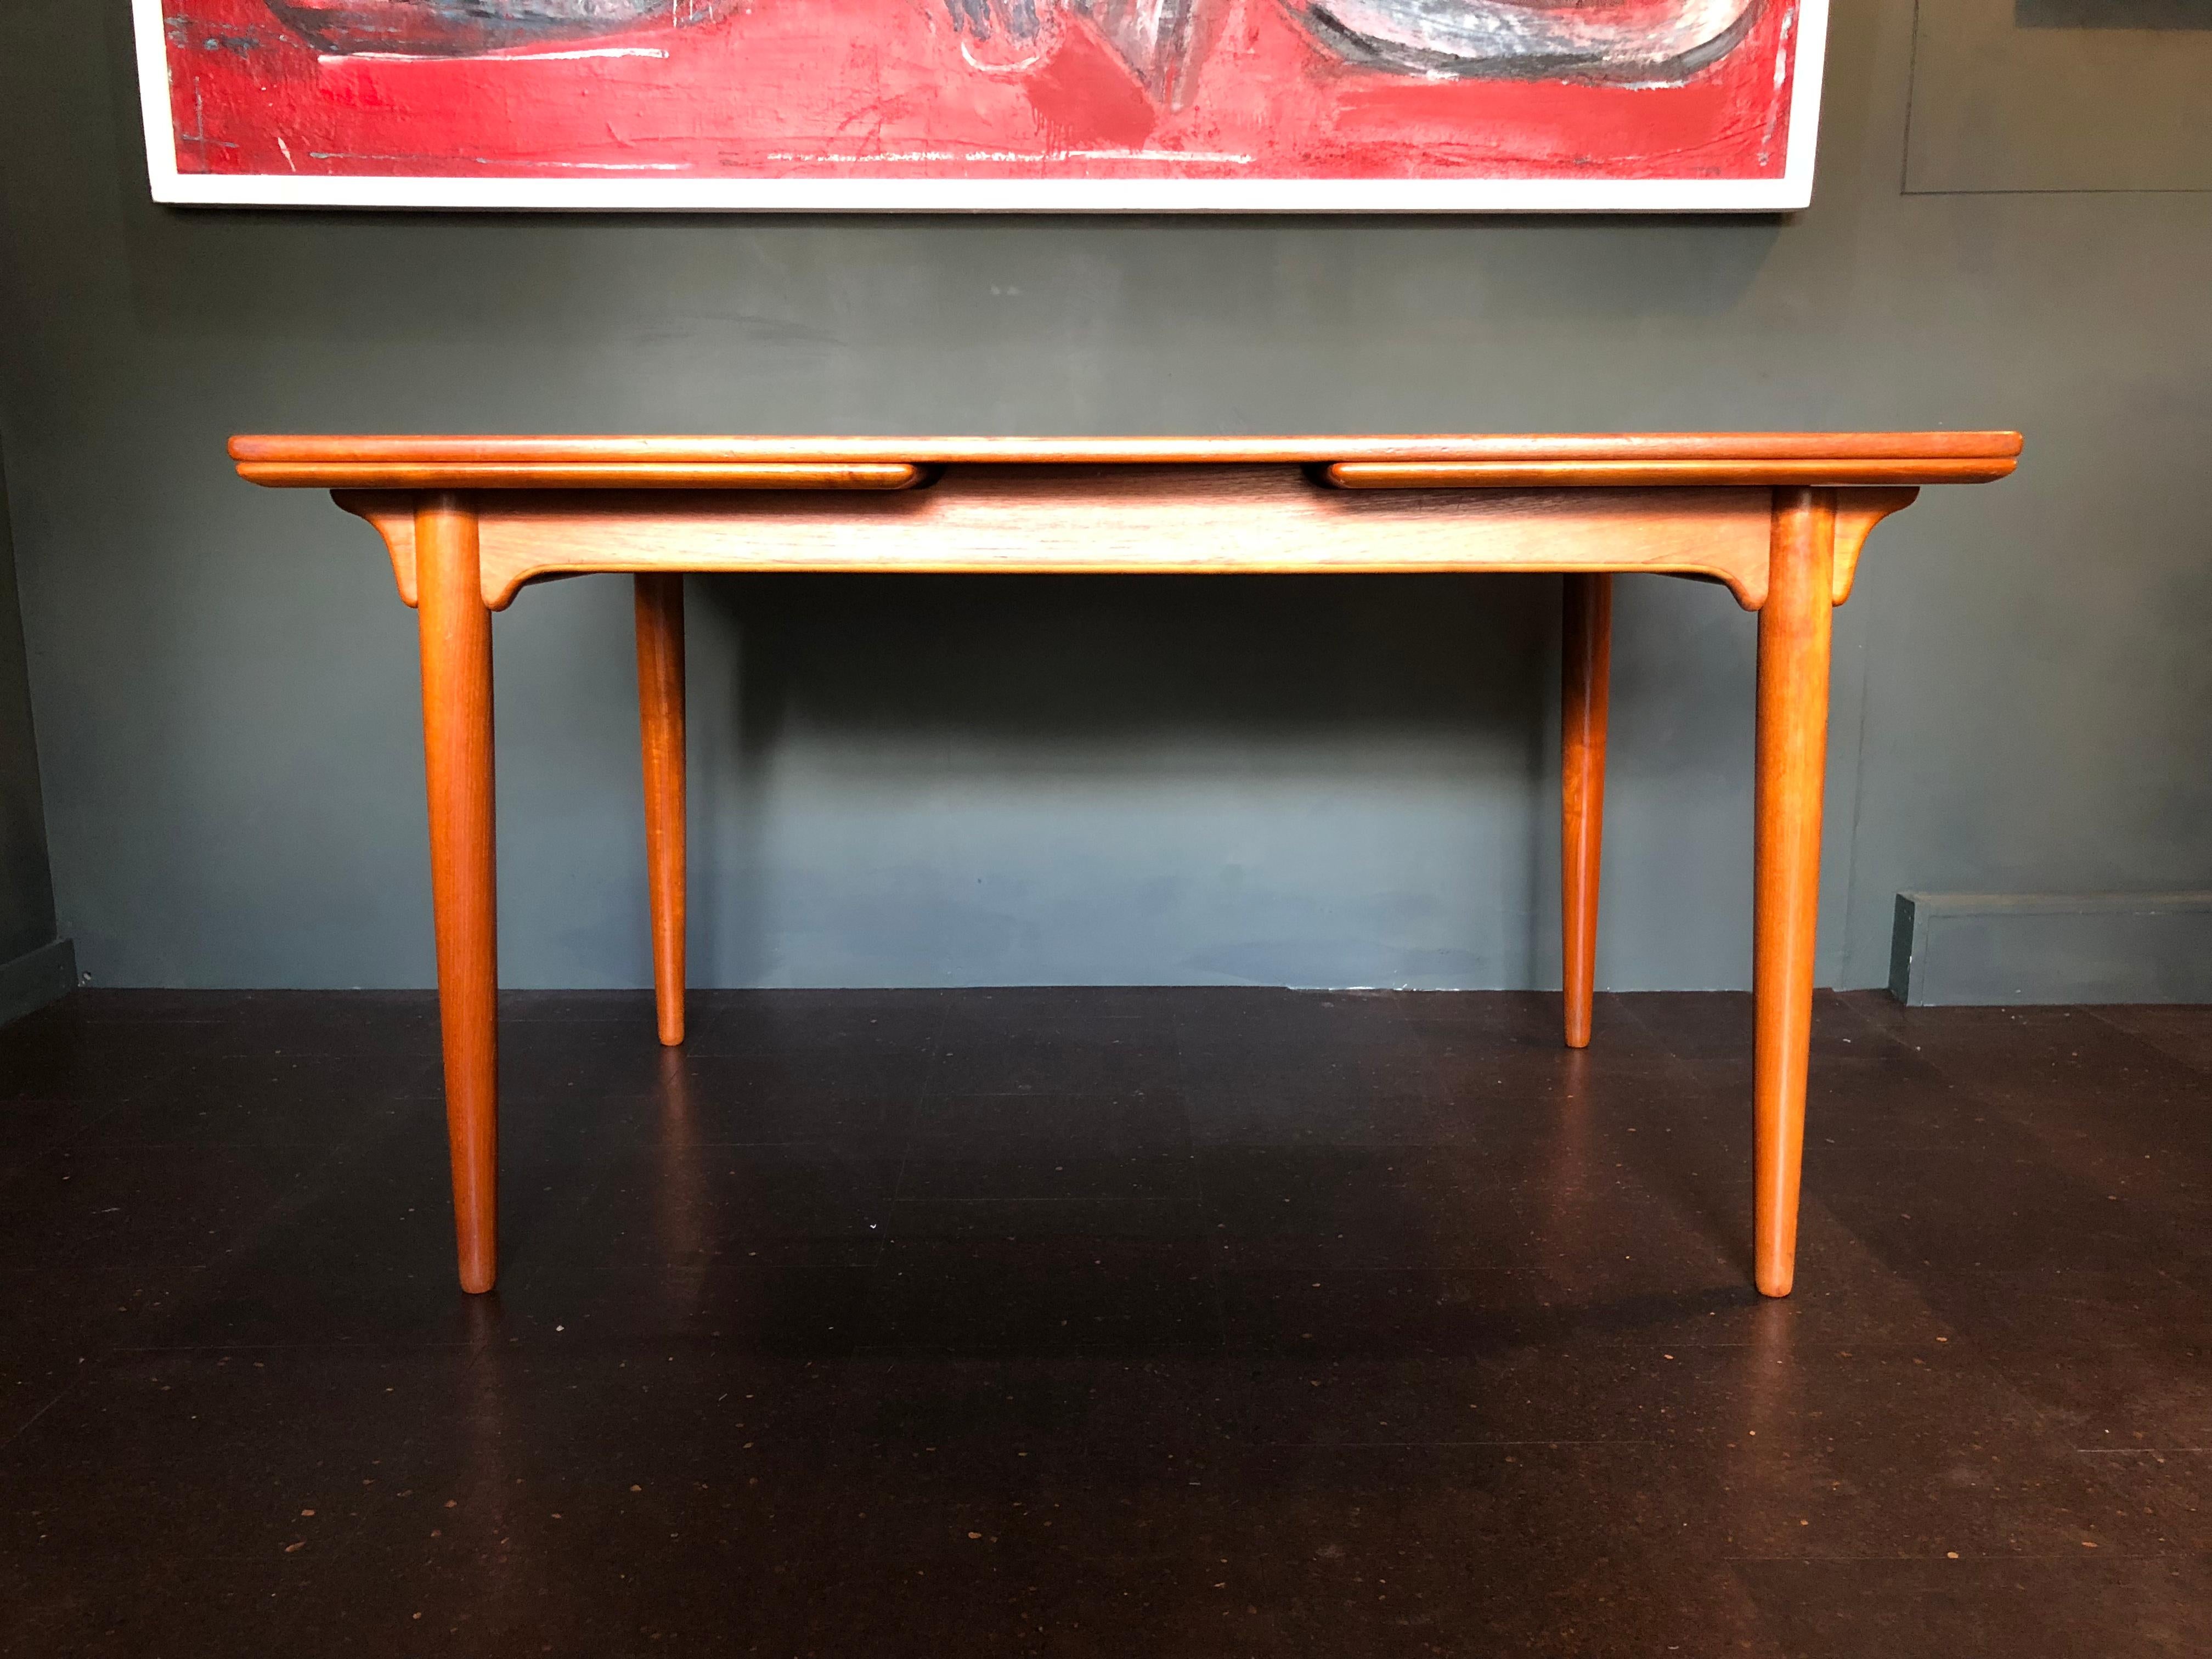 Classic Omann Jun - Gunni Omann dining table in Teak. Double extending. Produced in Denmark circa 1960. In fantastic condition with surface repolishing. Dismantles and assembles easily for safer shipping/transport. Extends to 238cm.